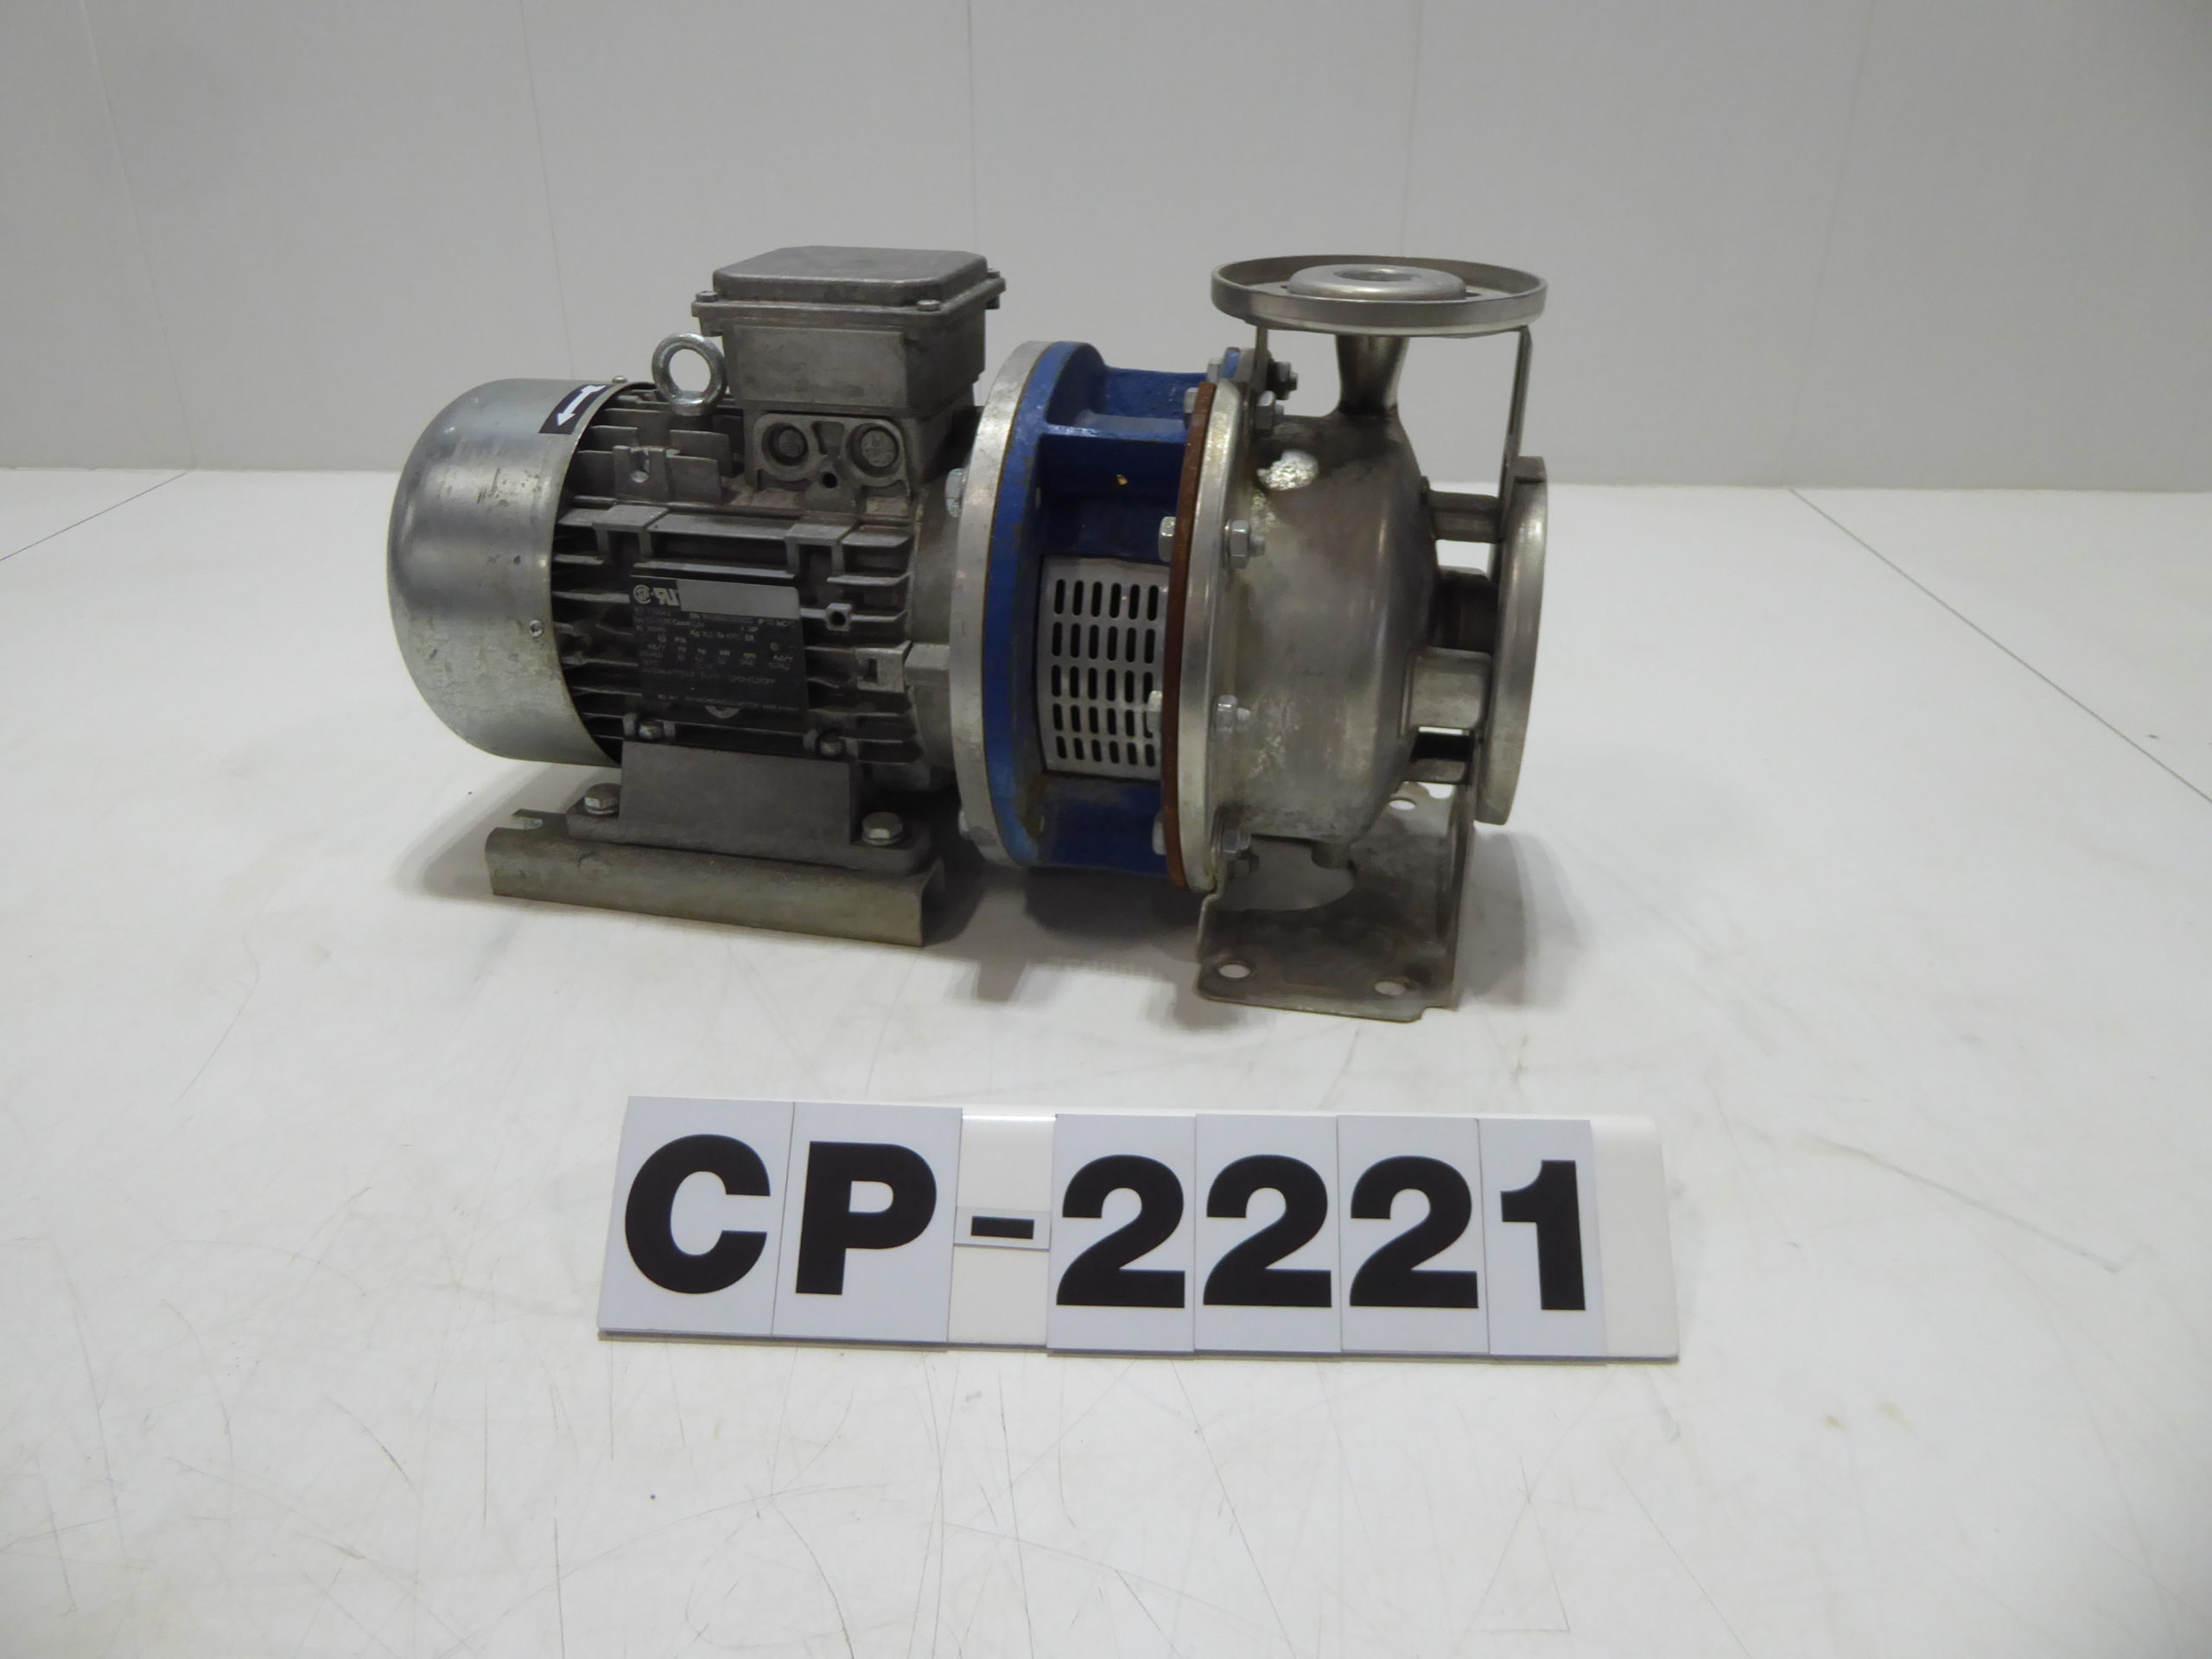 Used Centrifugal Pump - Asynchronous 4 HP 2" Inlet 1"Outlet Centrifugal CP2221-Pumps - Centrifugal